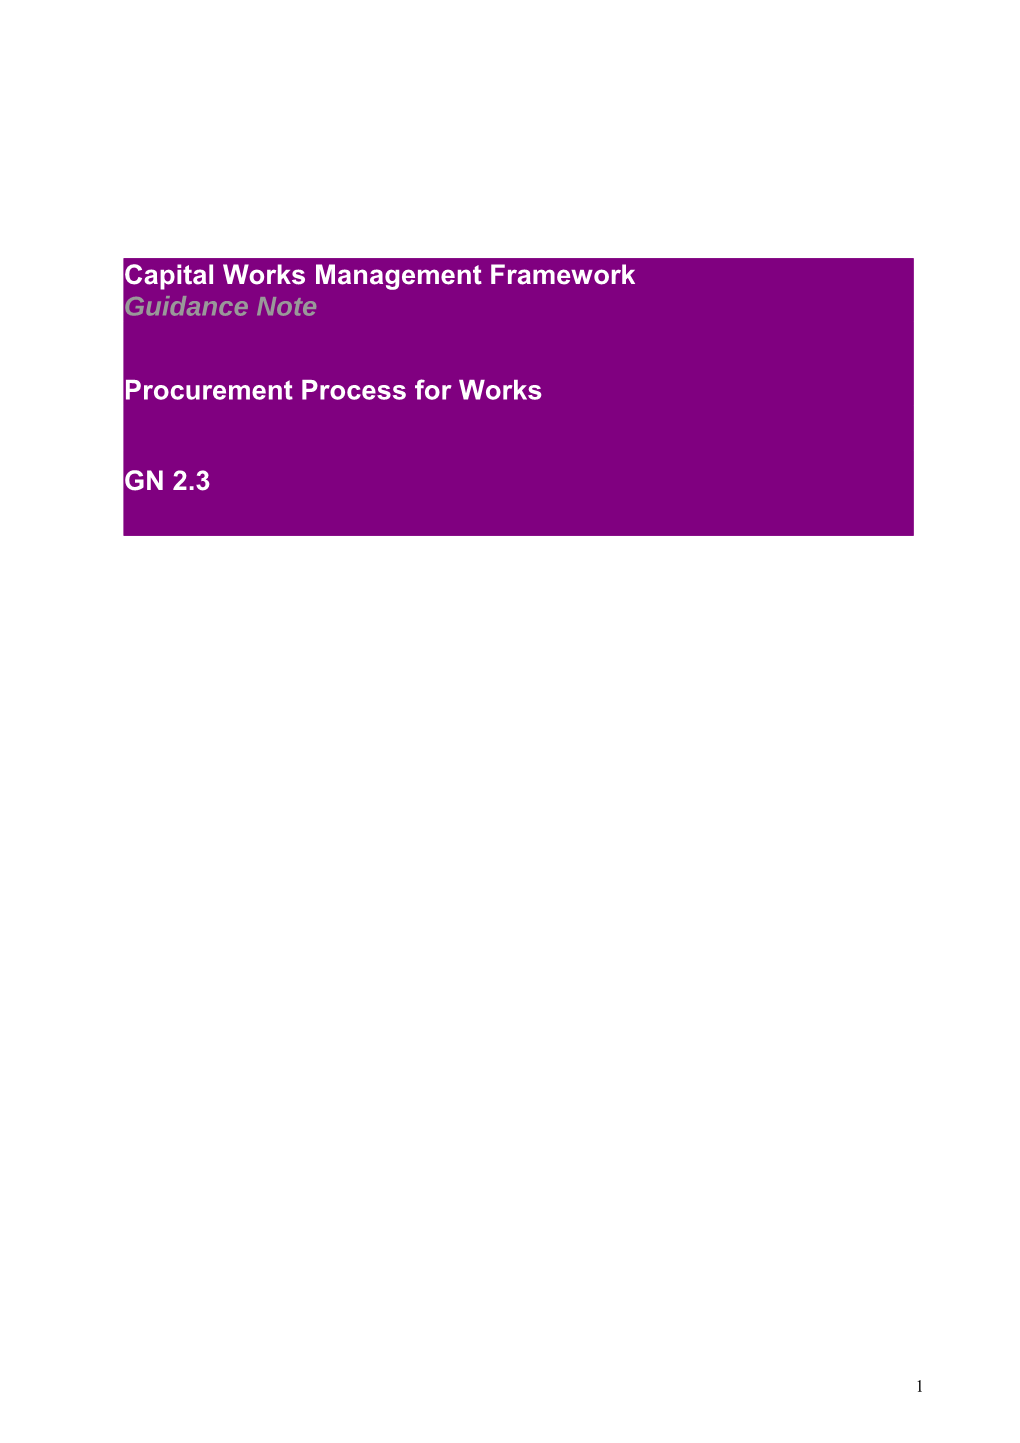 Procurement Process for Works Contractors Document Reference GN 2.3. V.1.0. 28 July 2009